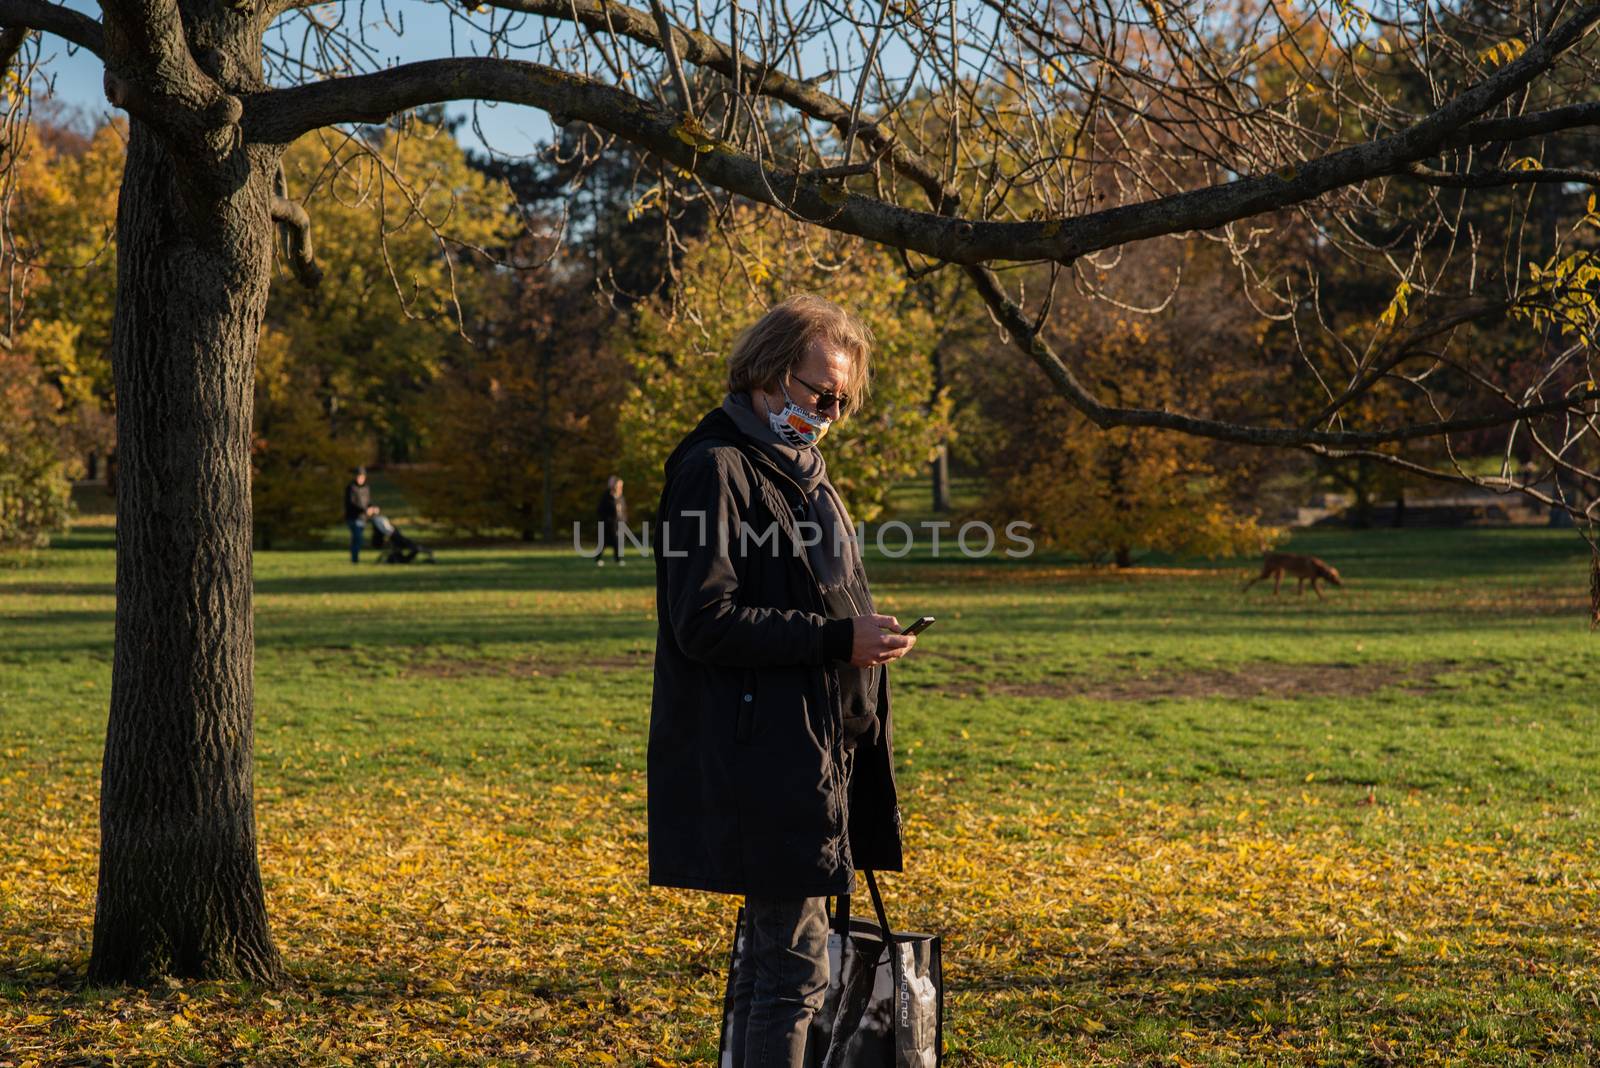 1/14/2020. Park Stromovka. Prague czech Republic. A man wearing a mask is checking his phone in the park on a Sunday winter day during COVID-19 lockdown..